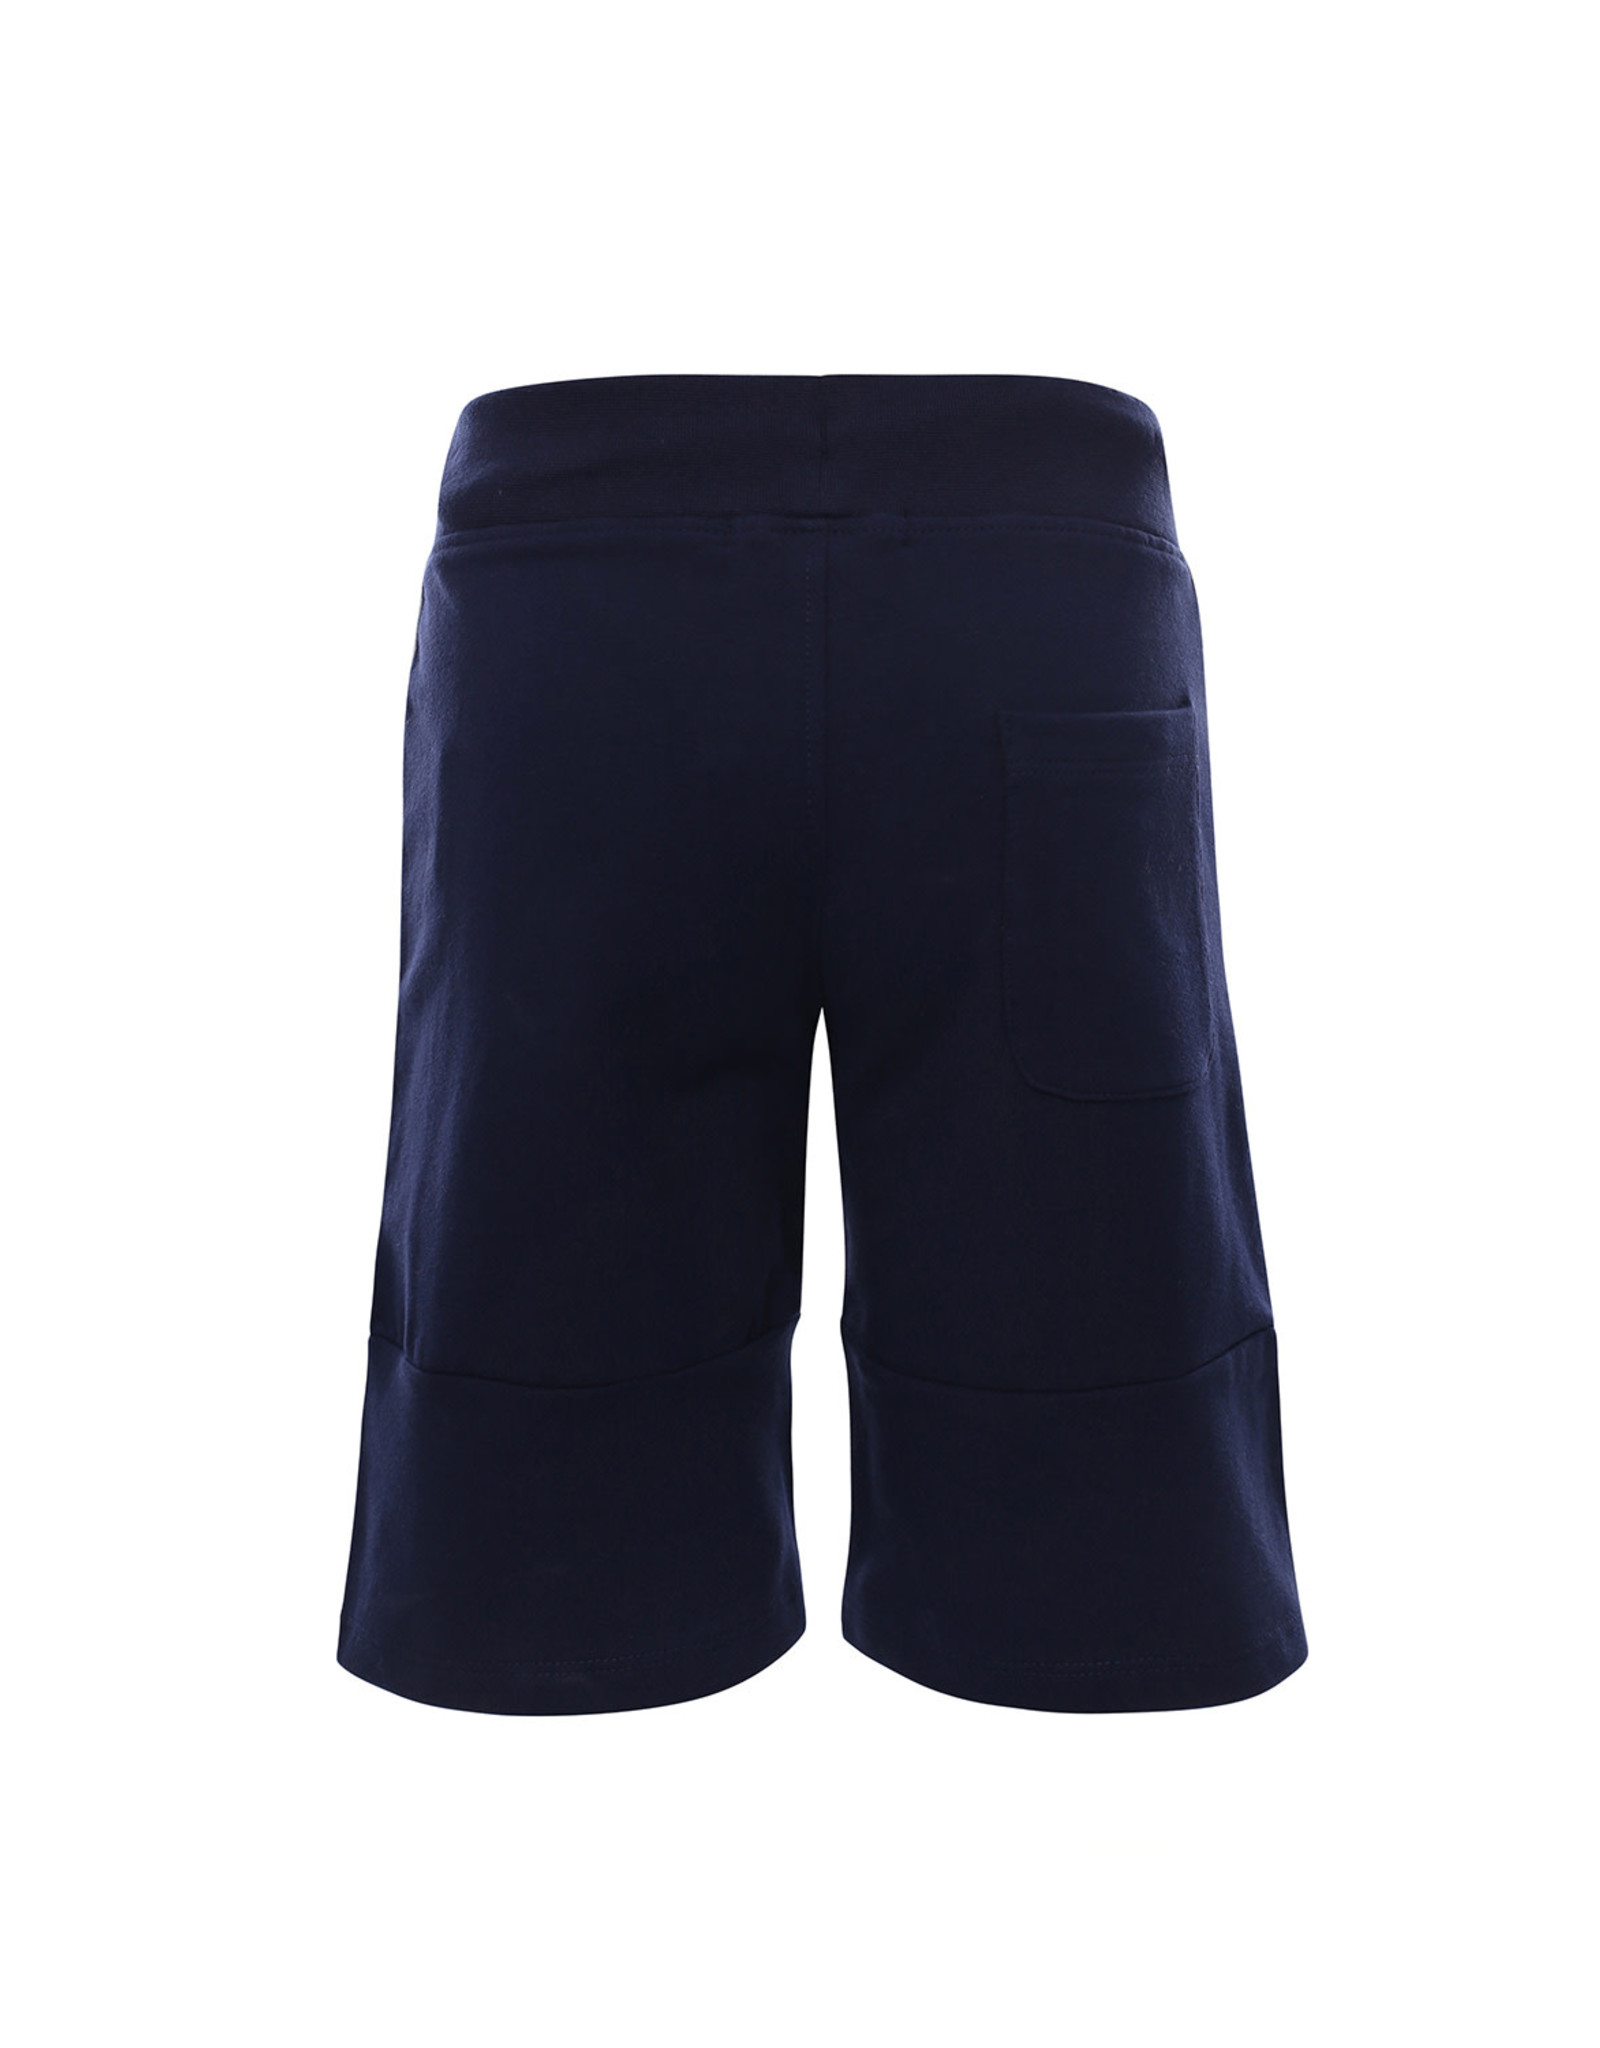 Common Heroes Common Heroes sweat shorts Blue z23